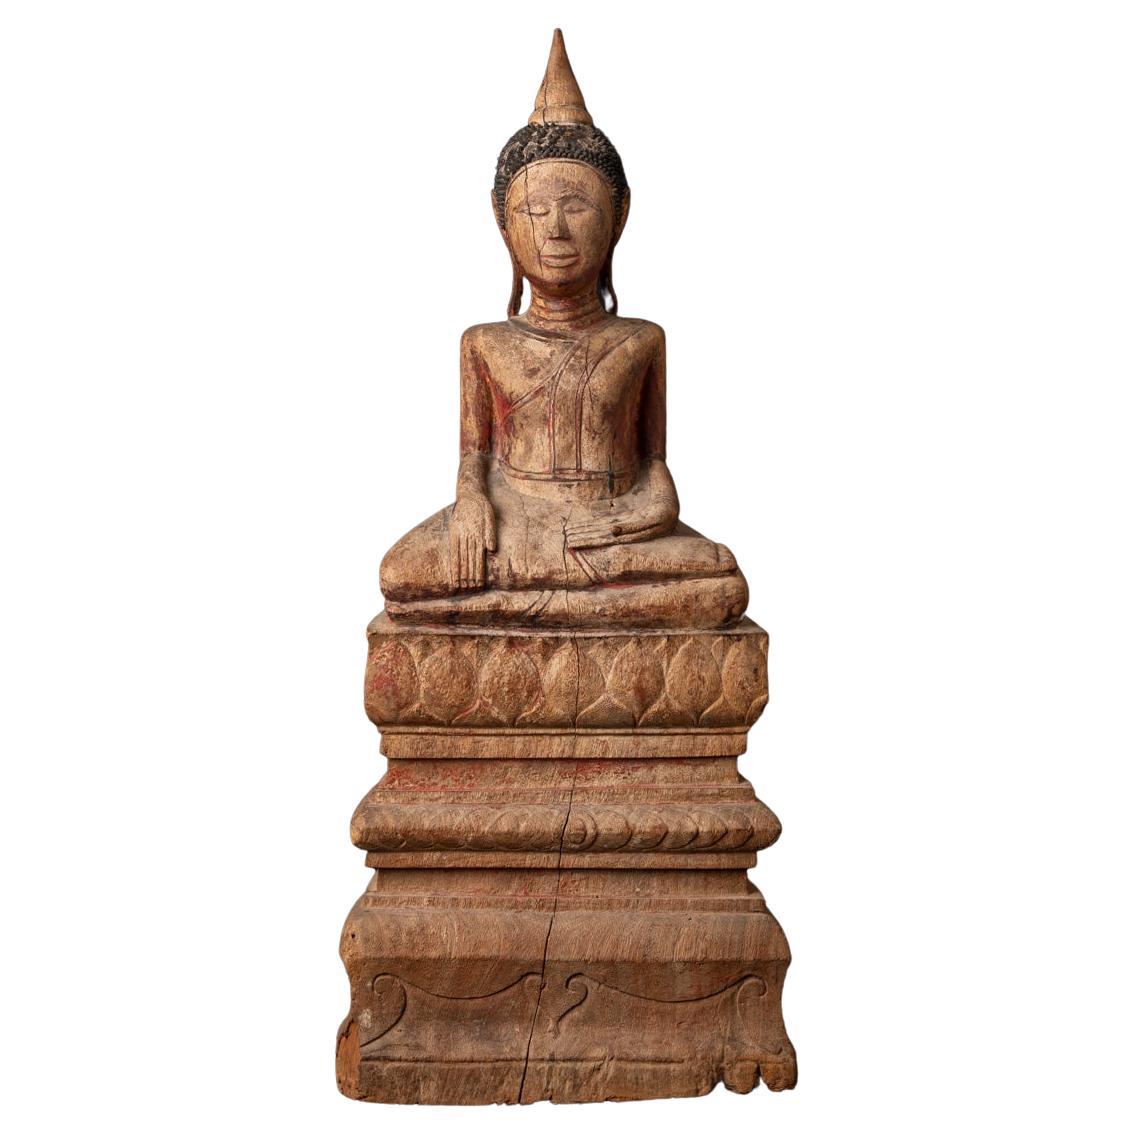 18th century antique wooden Buddha statue from Cambodia in Bhumisparsha mudra For Sale